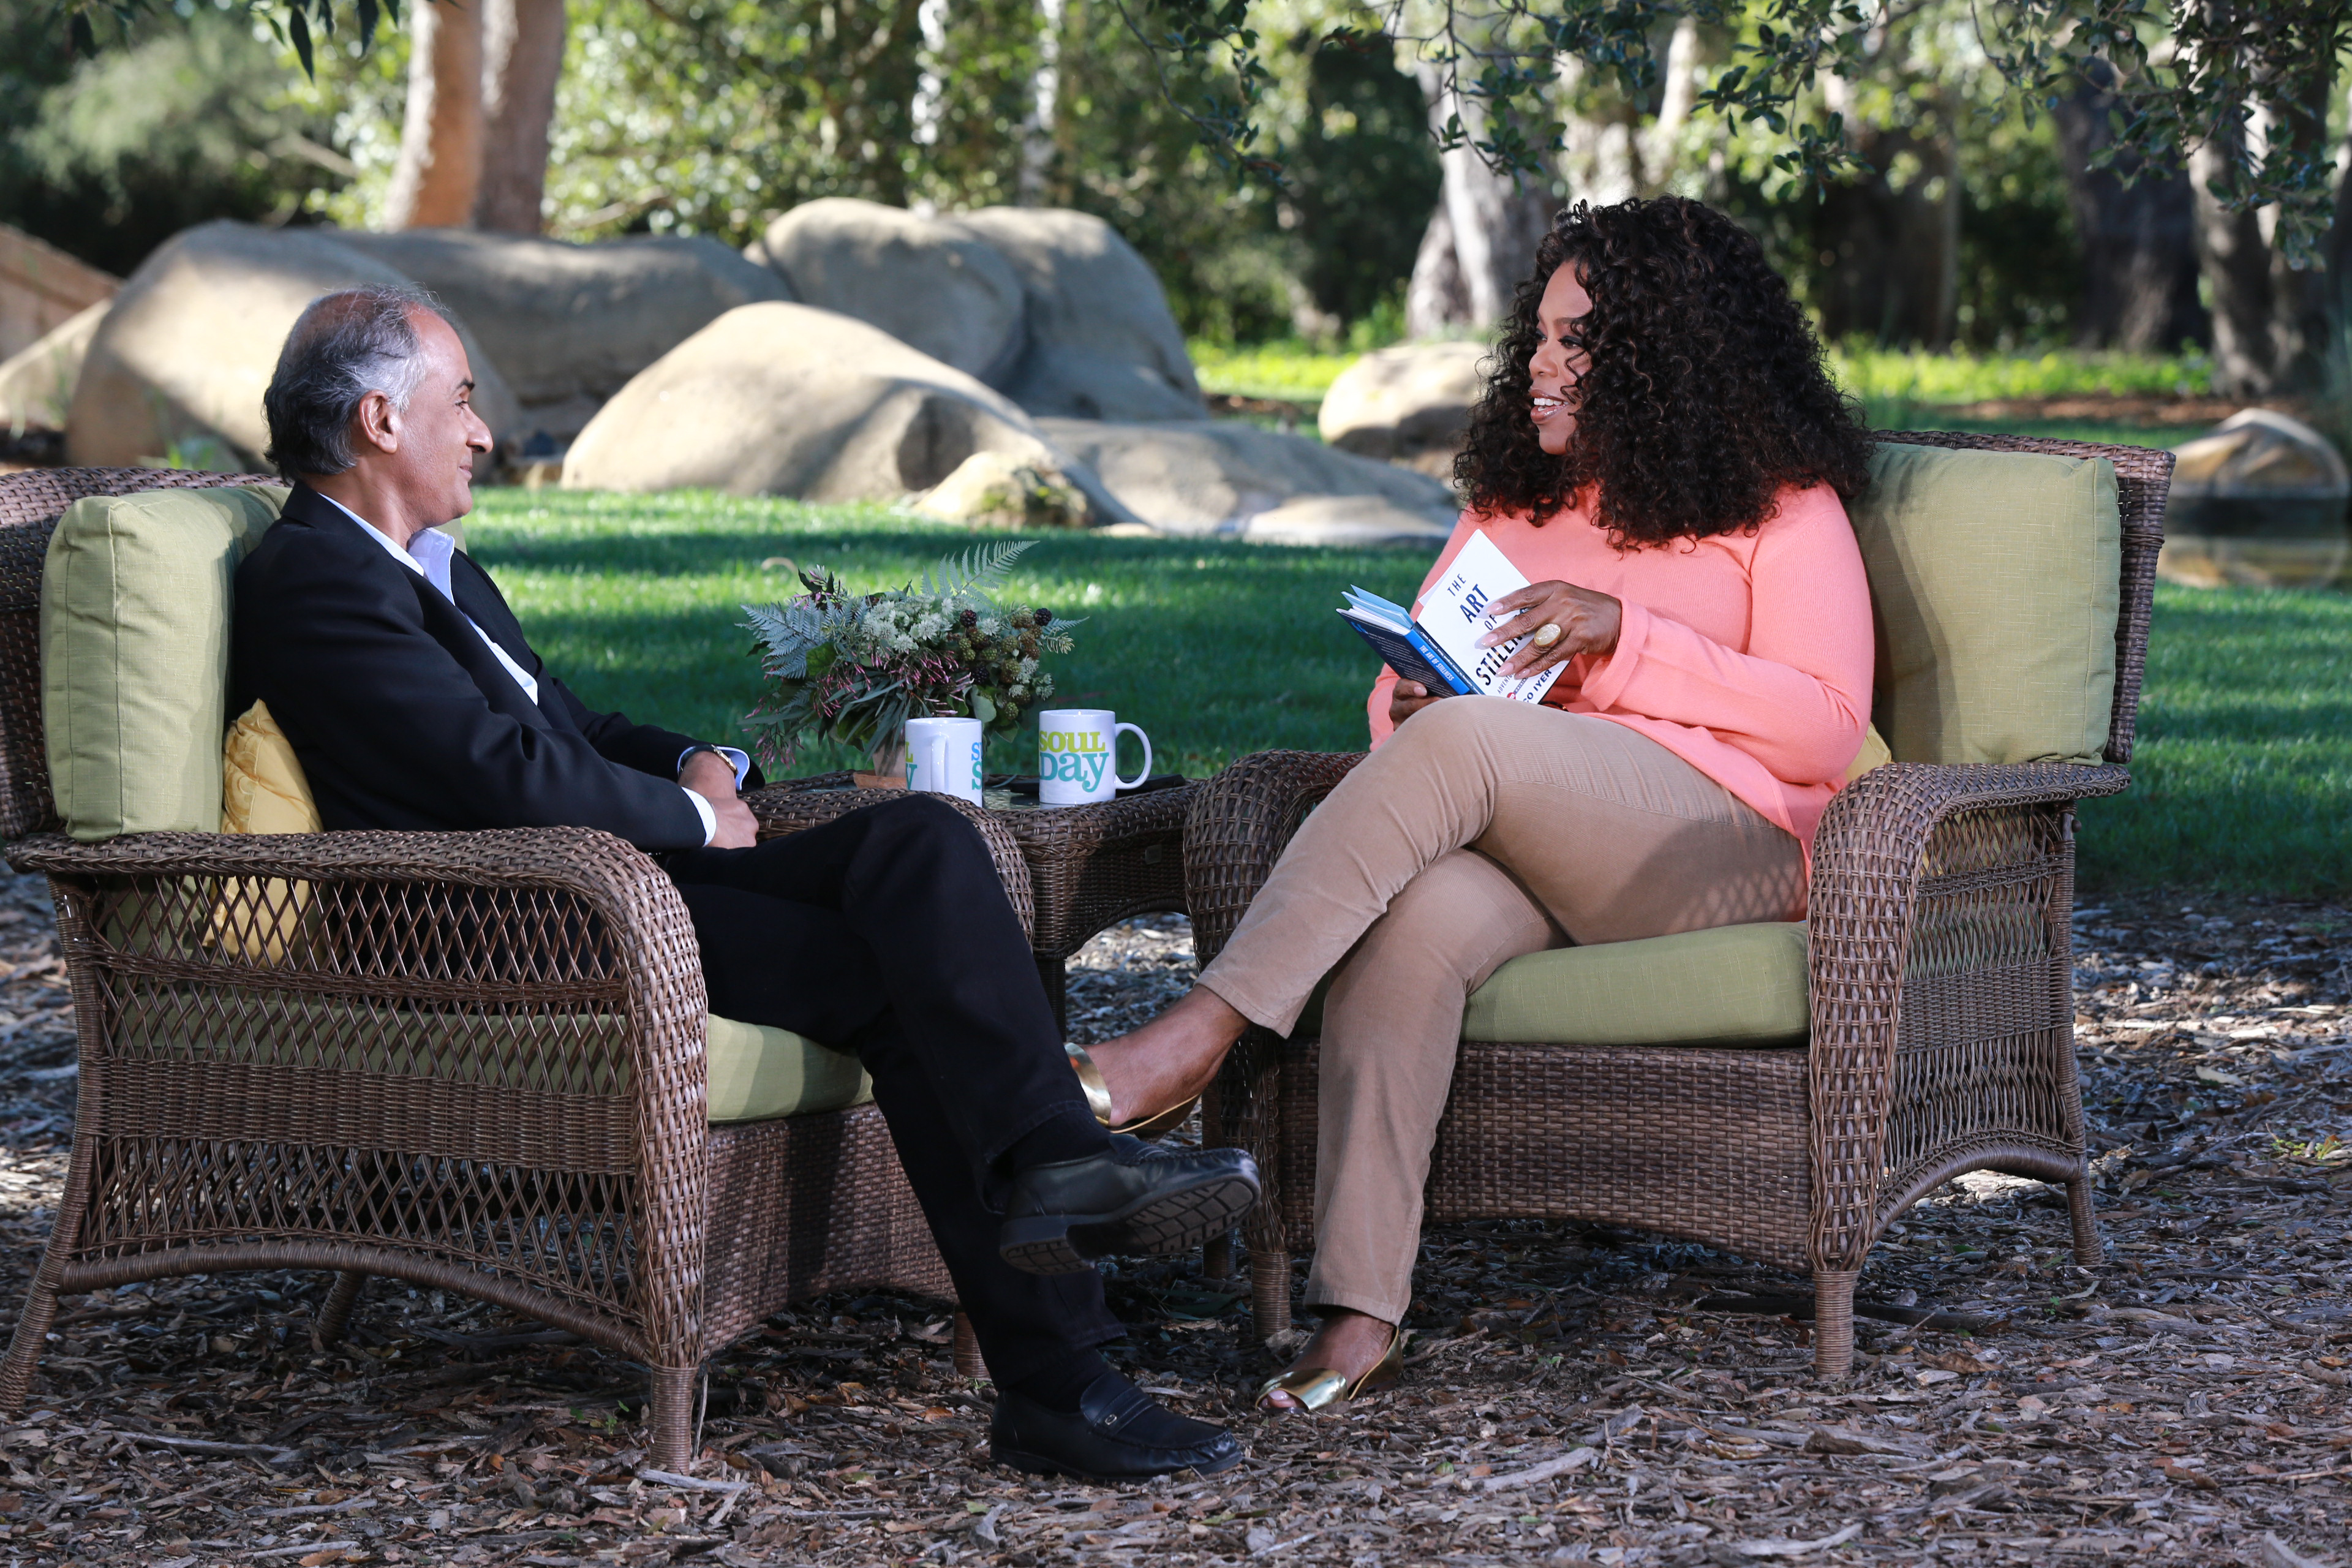 Oprah interviews Pico Iyer for Super Soul Sunday under the oak trees in her backyard. In this upcoming episode of the show, Oprah shares an insight in Iyer's TED Book that led her too "the biggest aha of my life." Photo: Courtesy of OWN